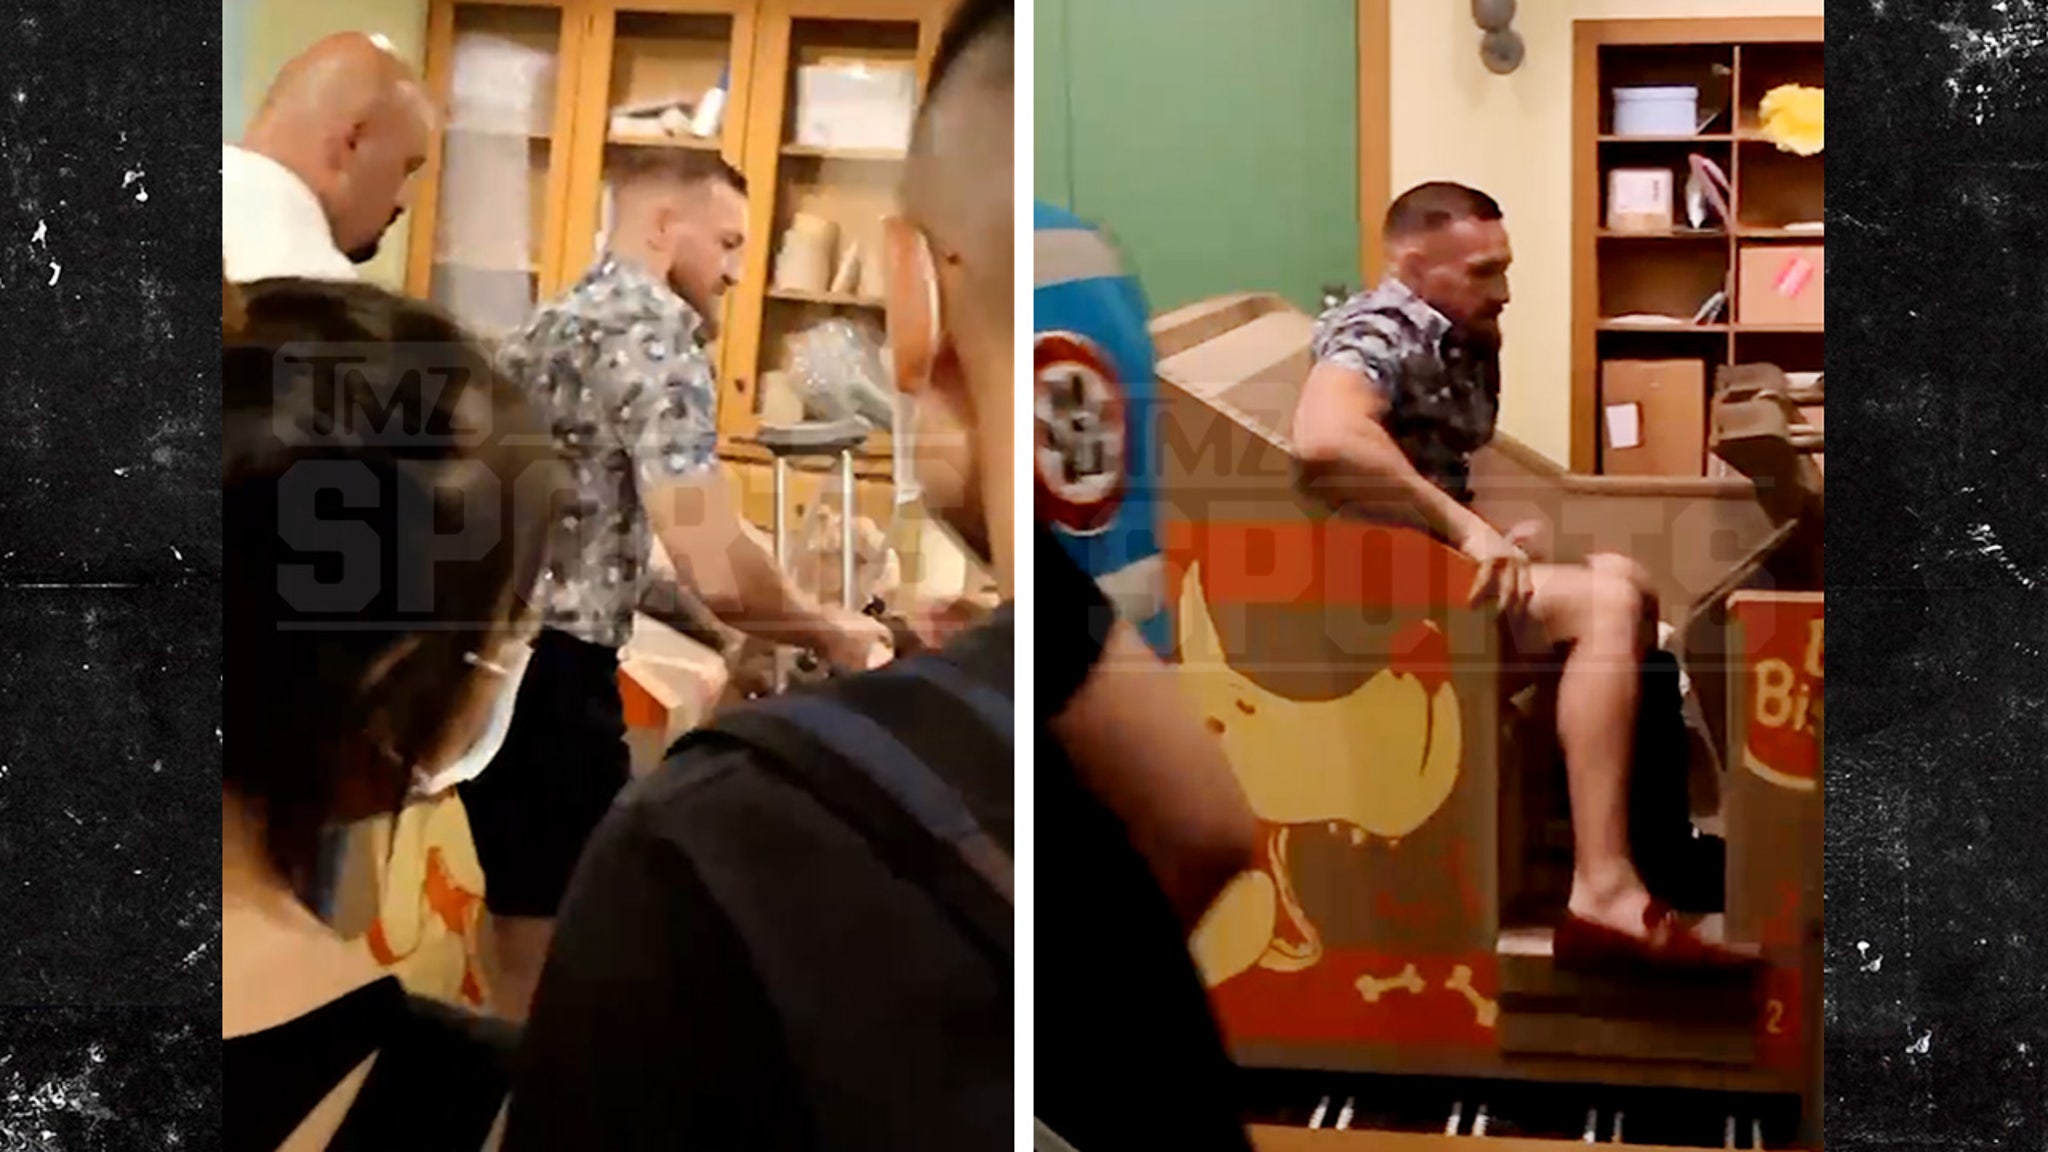 Conor McGregor on Crutches Splurges on Louis Vuitton During His